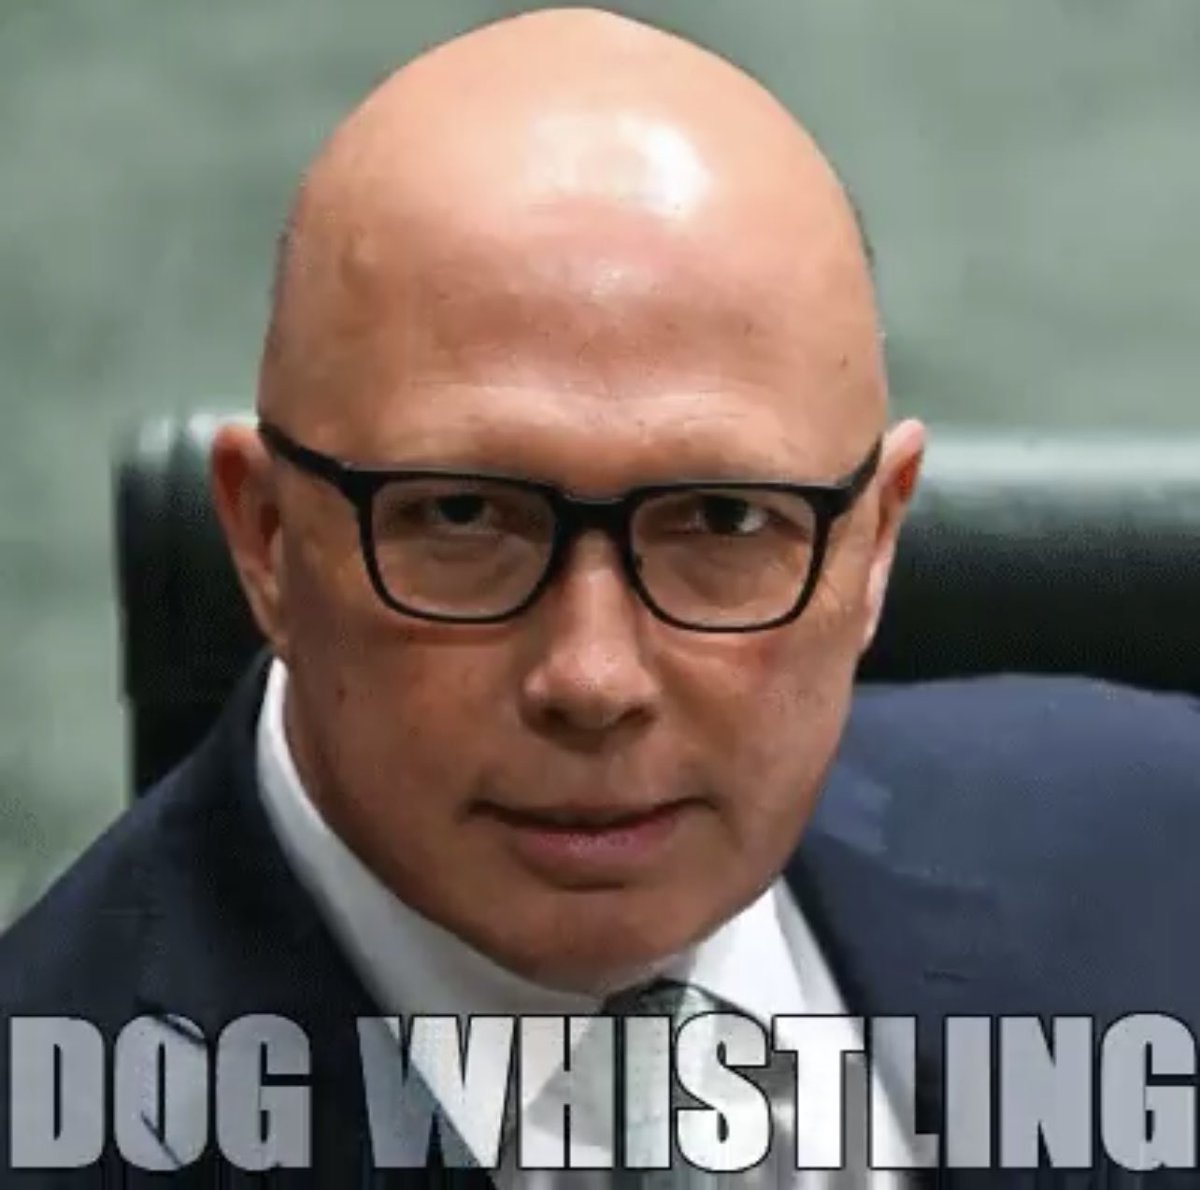 Like or repost if you think #DictatorDutton should resign. #IStandWithWoolies